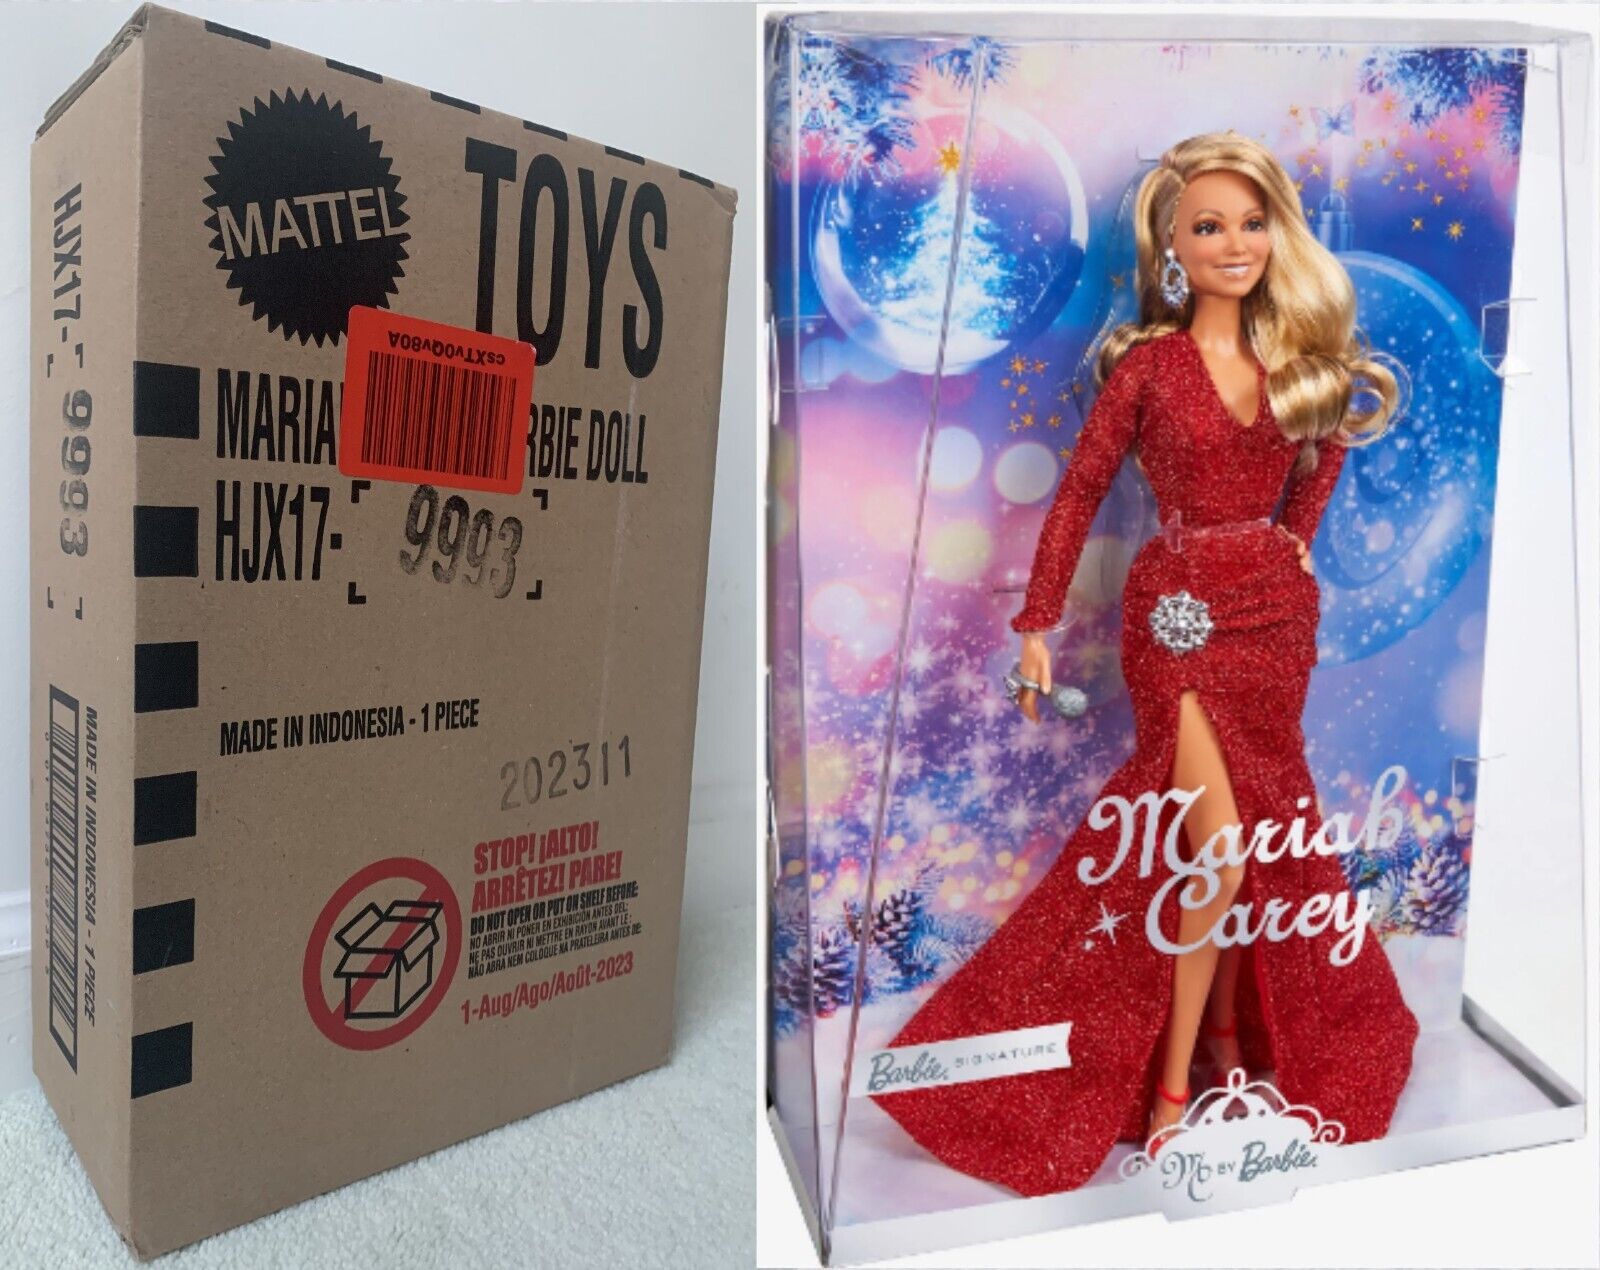 11” Barbie X Mariah Carey Holiday Celebration Doll Red Dress Signature Carry New Sealed Box Includes Certificate Of Authenticity 